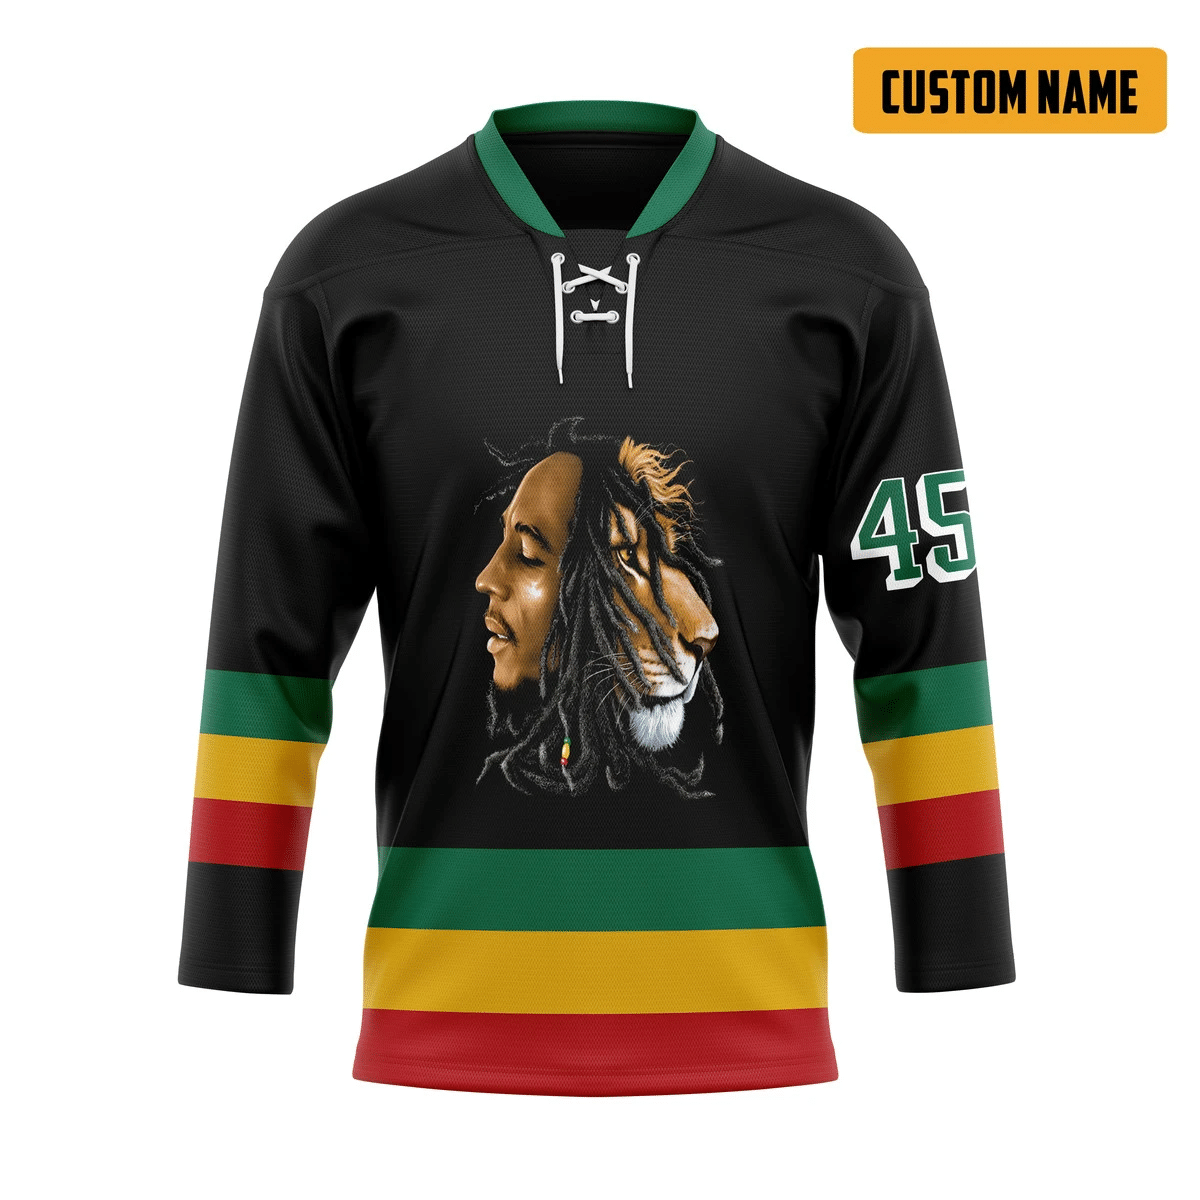 If You Want To Buy A Hockey Jersey, Be Sure To Check Top List Below Word3